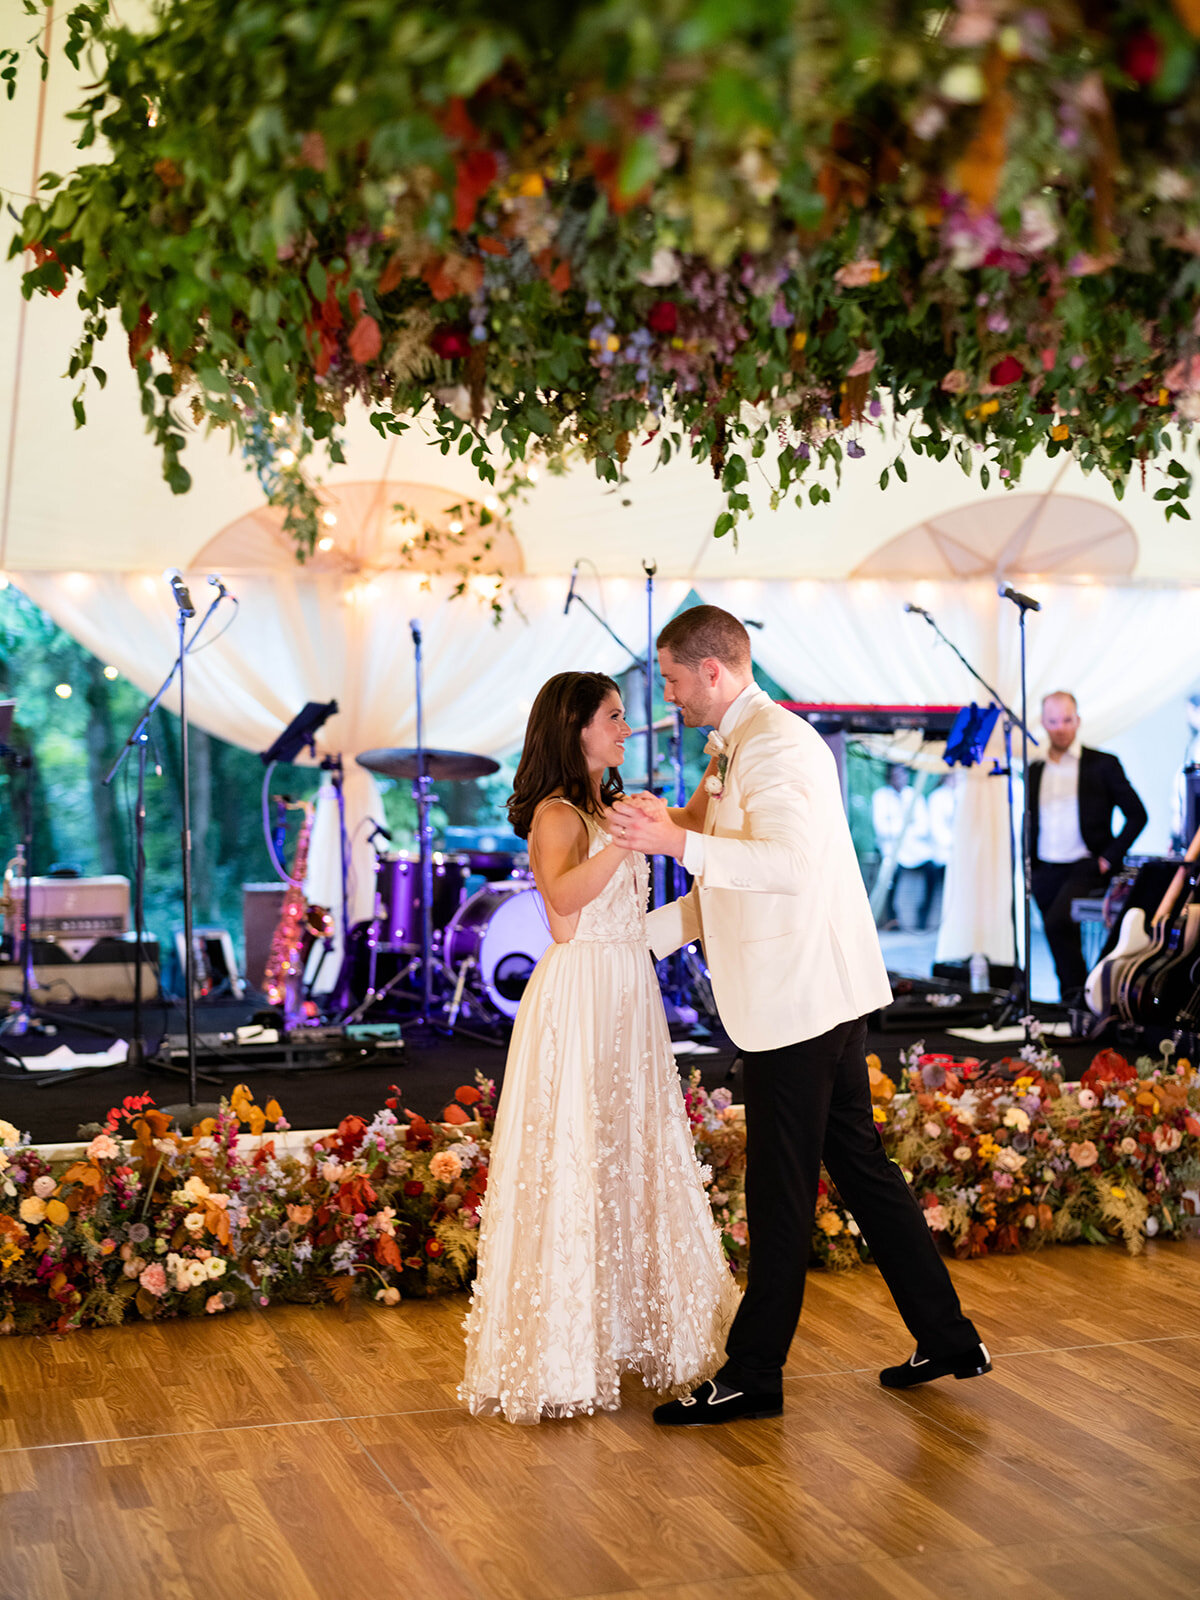 An oversized square hanging flower installation over the dance floor is a great alternative to a floral chandelier! This one has lush smilax vines, hops, copper beech, and bright wildflowers. RT Lodge and Nashville wedding floral designer.